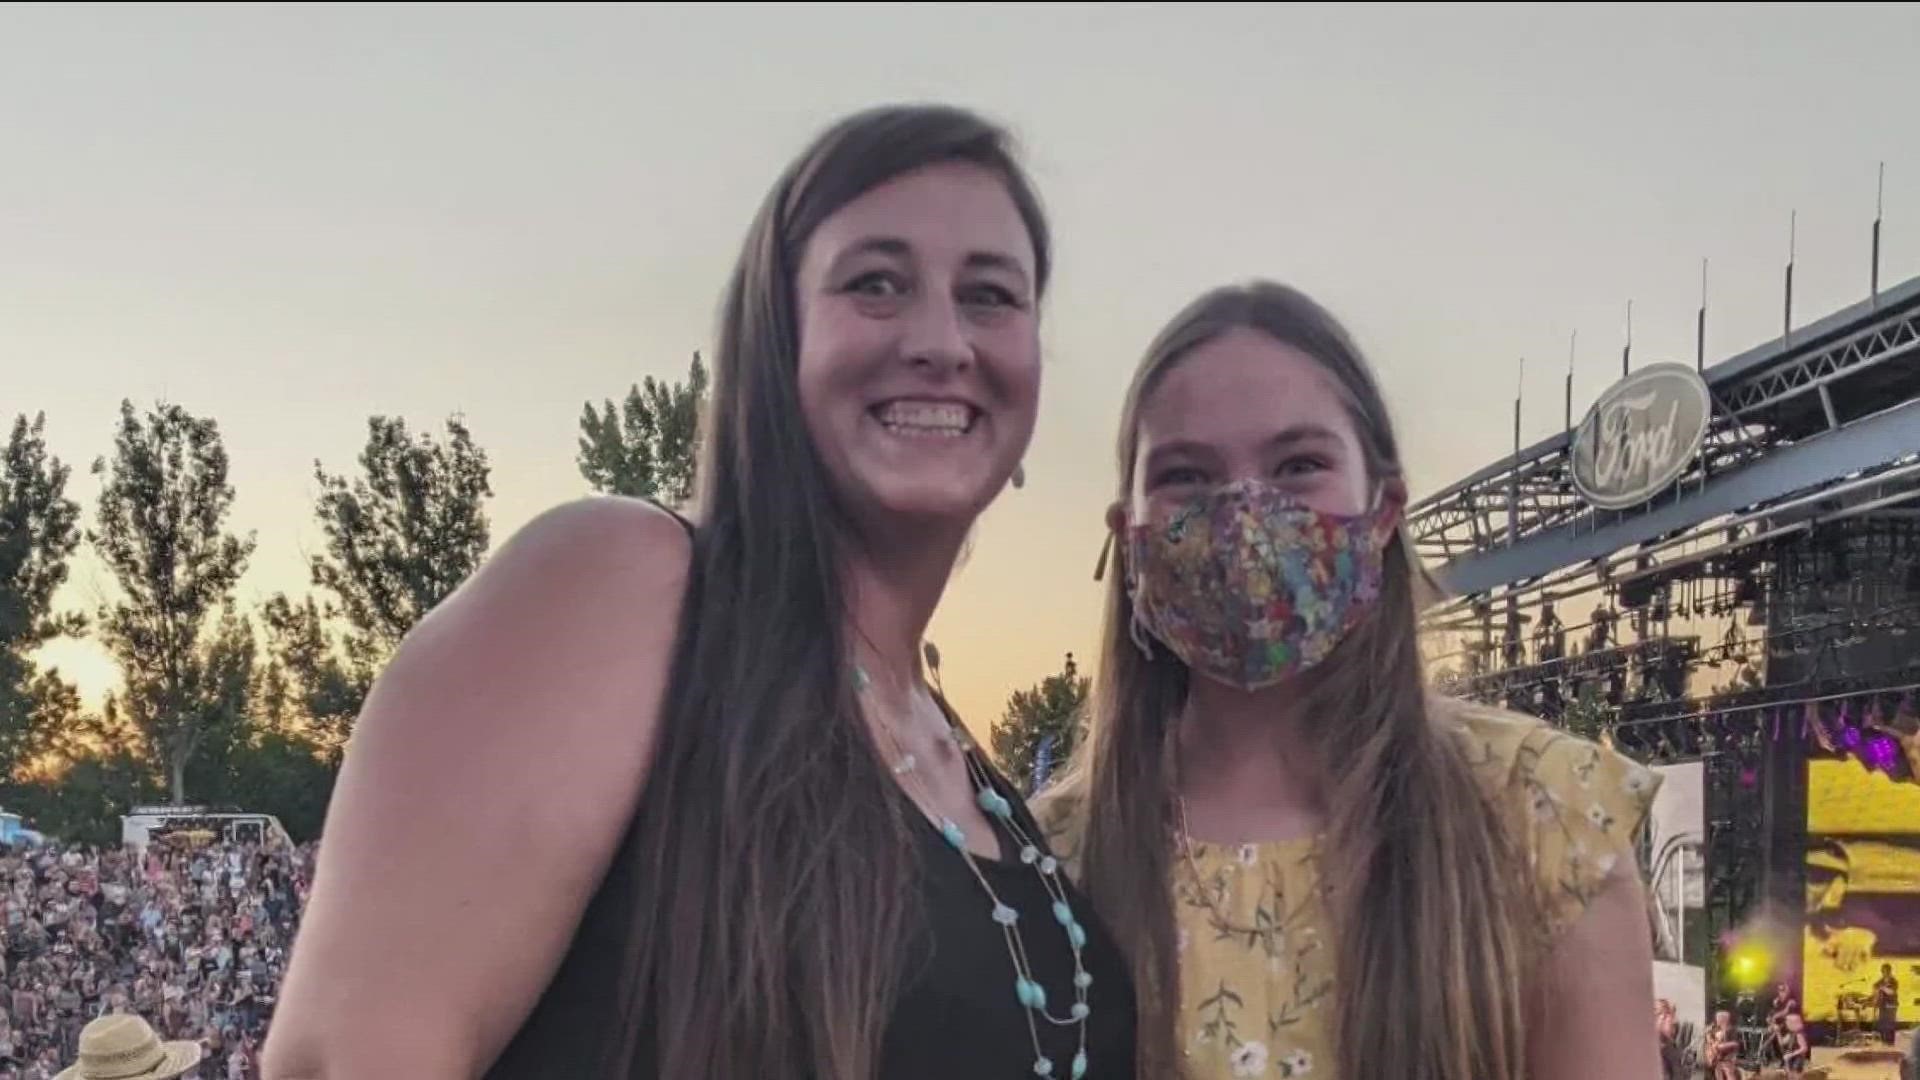 12-year-old Charlize Adams was recently deemed cancer free, and her mom wanted to take her to The Chicks concert to celebrate. What happened next is incredible!